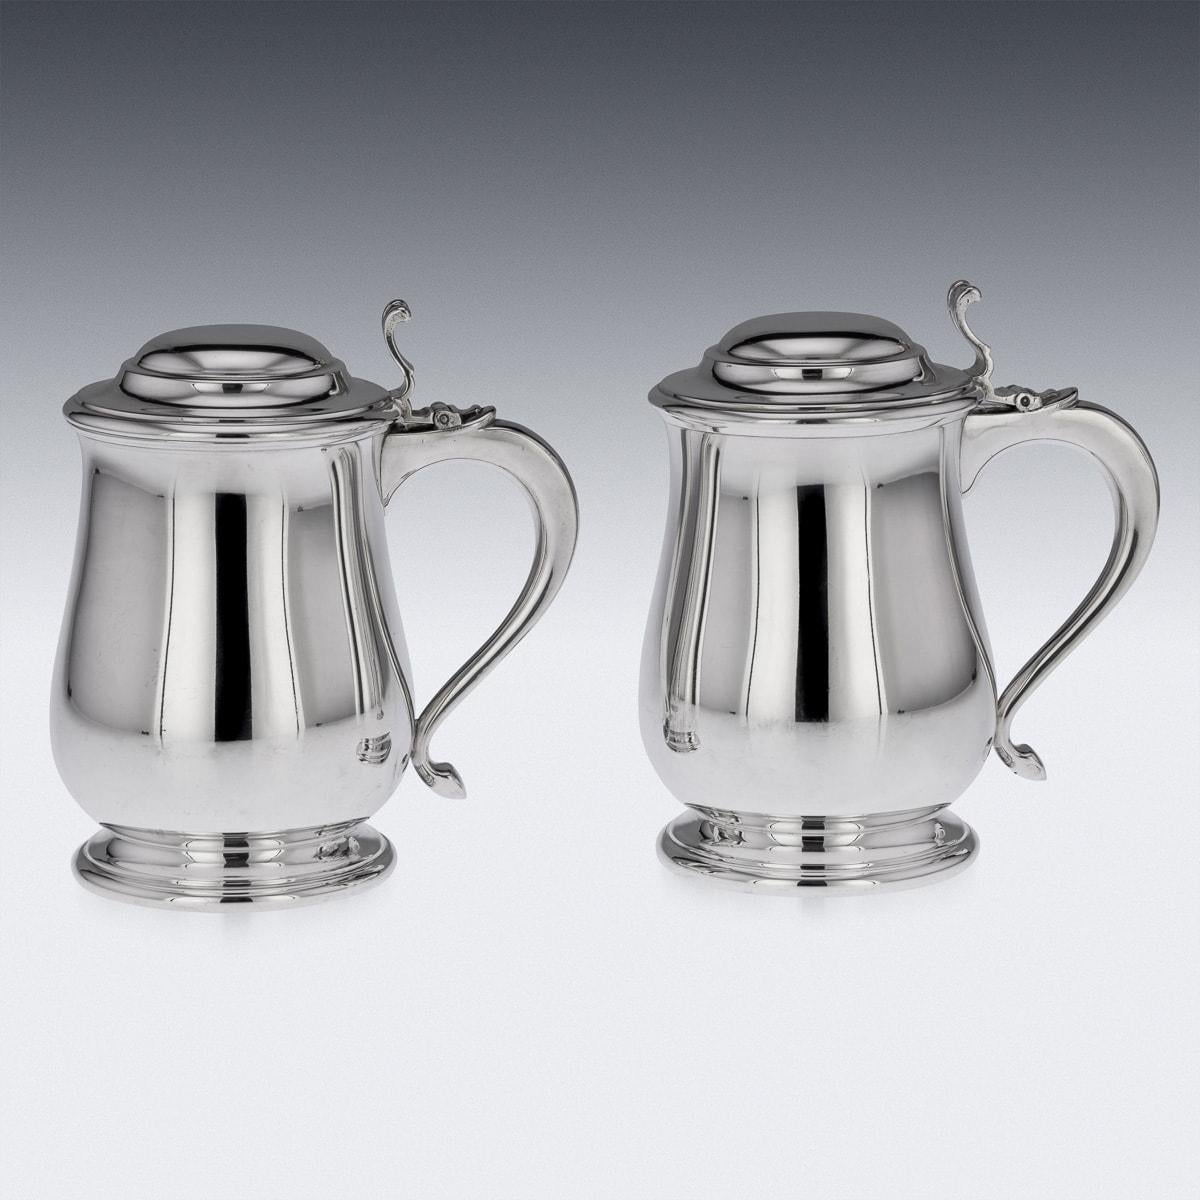 Antique 20th Century pair of Italian solid silver lidded tankards, the domed lid is applied with a cast thumb-piece, the scrolled handle terminating in a smooth point. The tankard features a bellied body on a flared foot, the sides are smooth. On